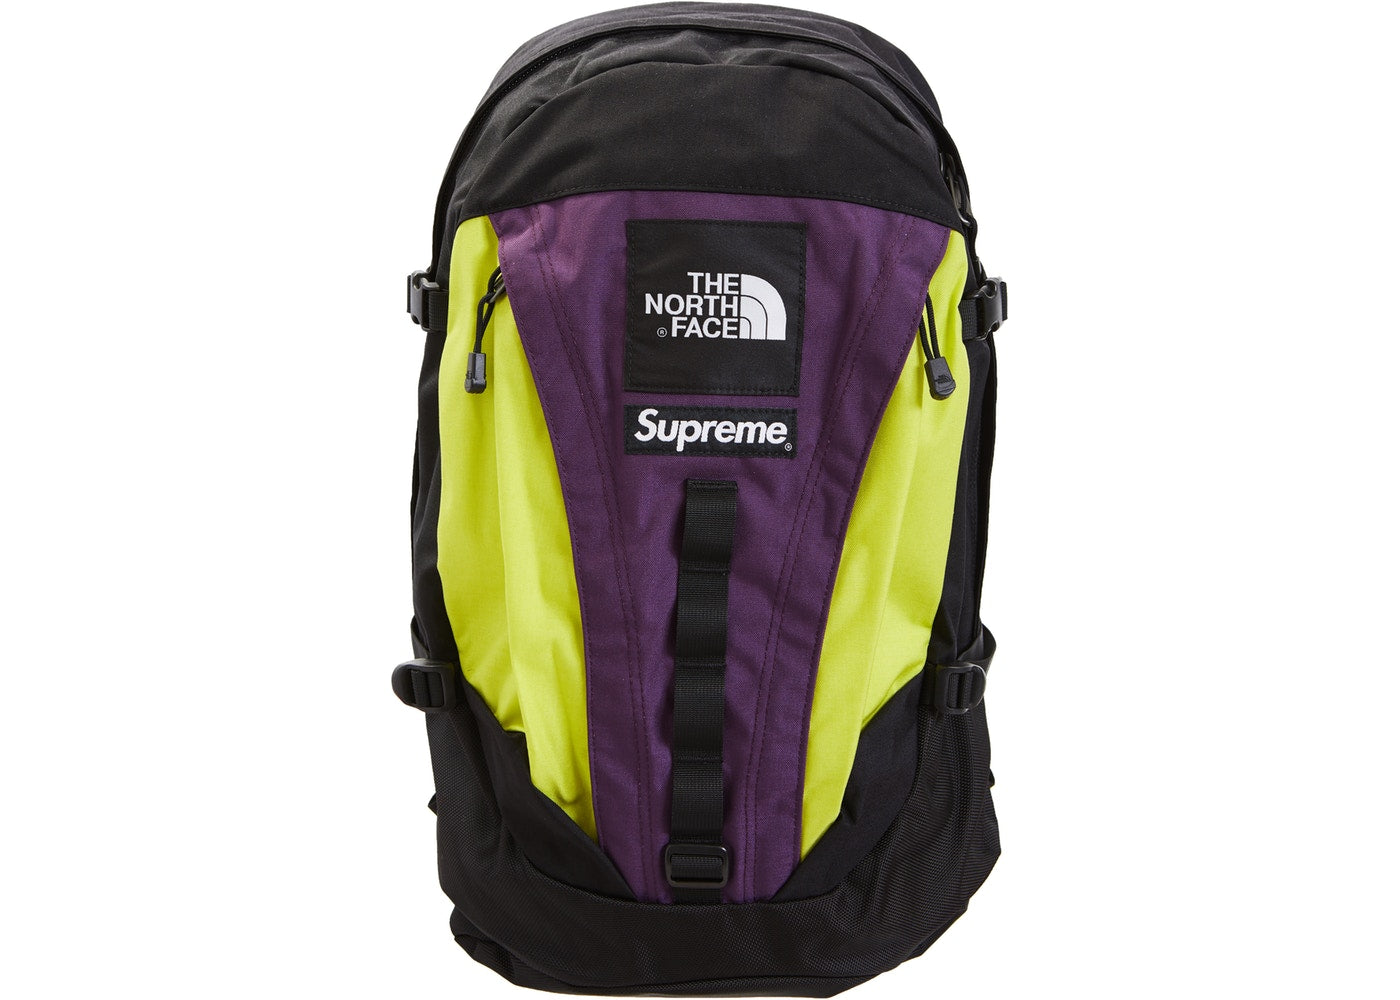 Supreme The North Face Expedition Backpack- Sulphur